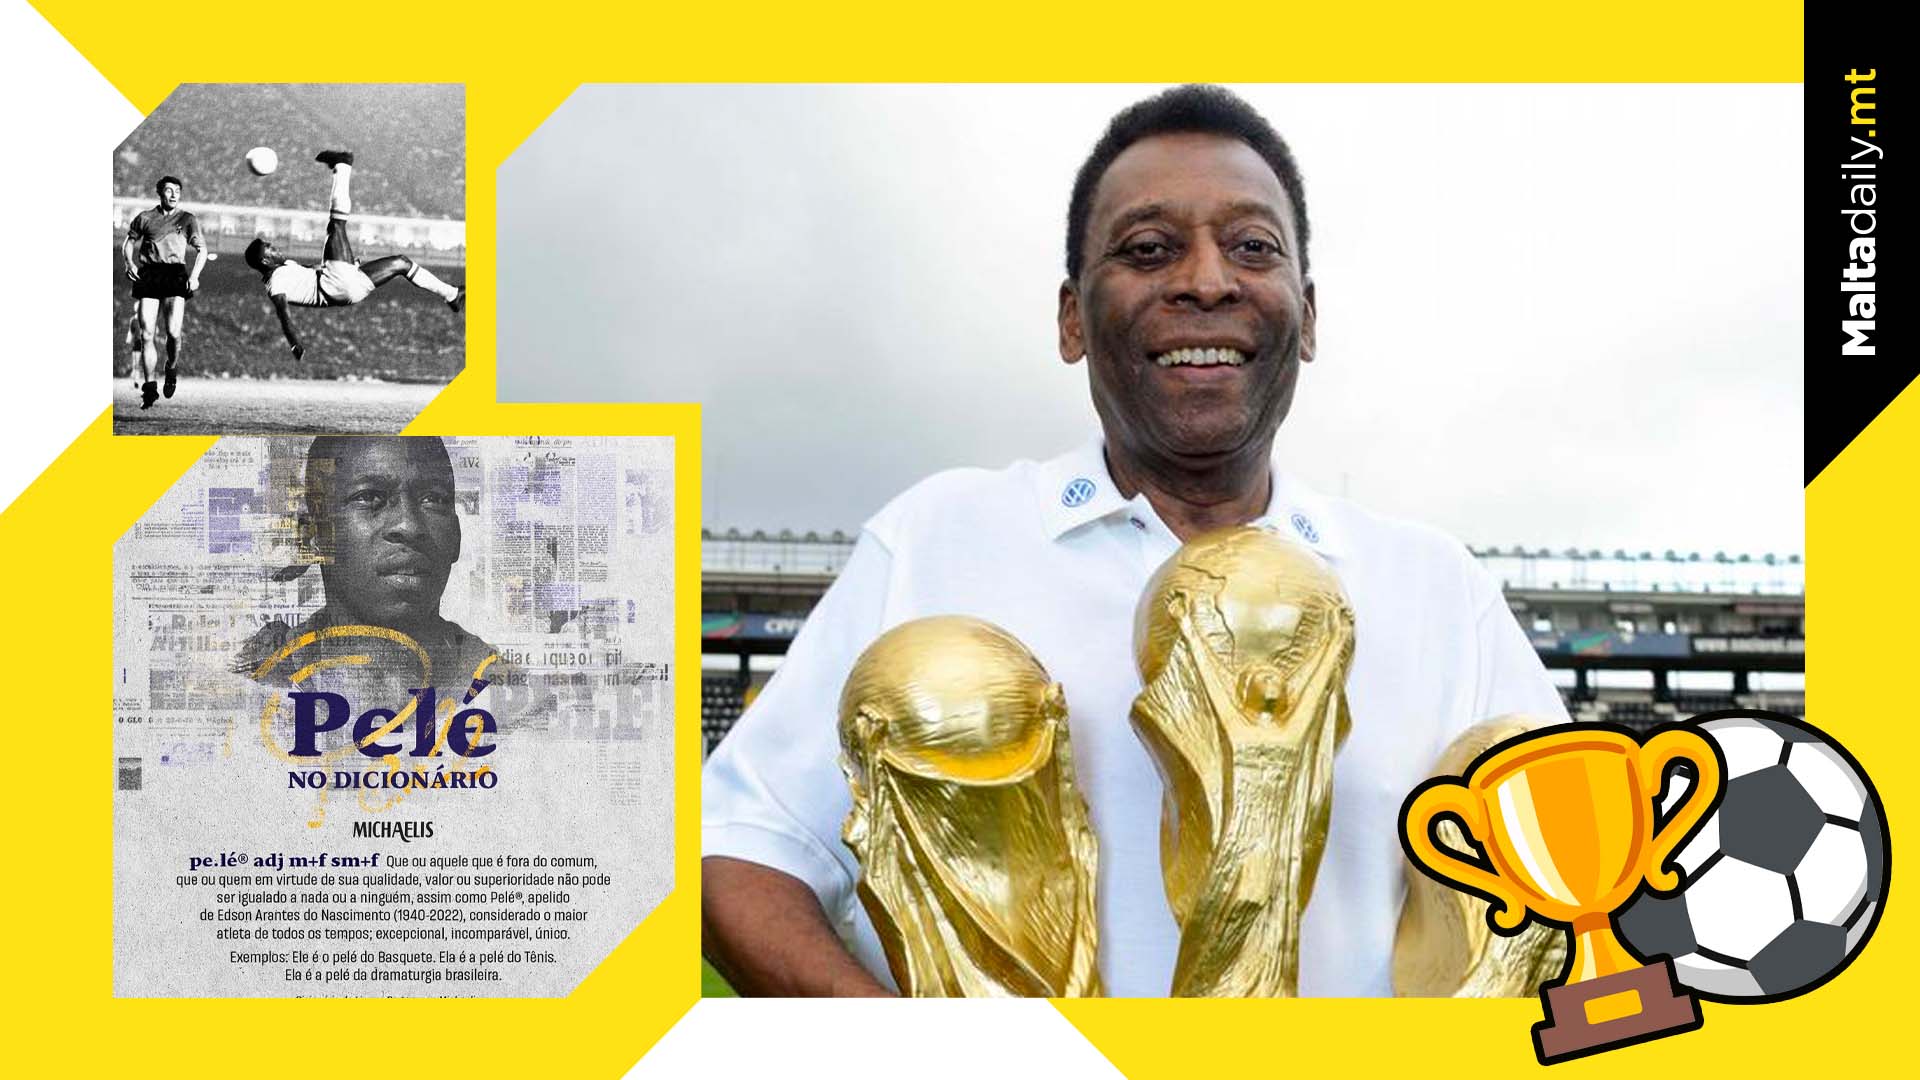 Pele enters dictionary to mean 'unique' or 'incomparable'